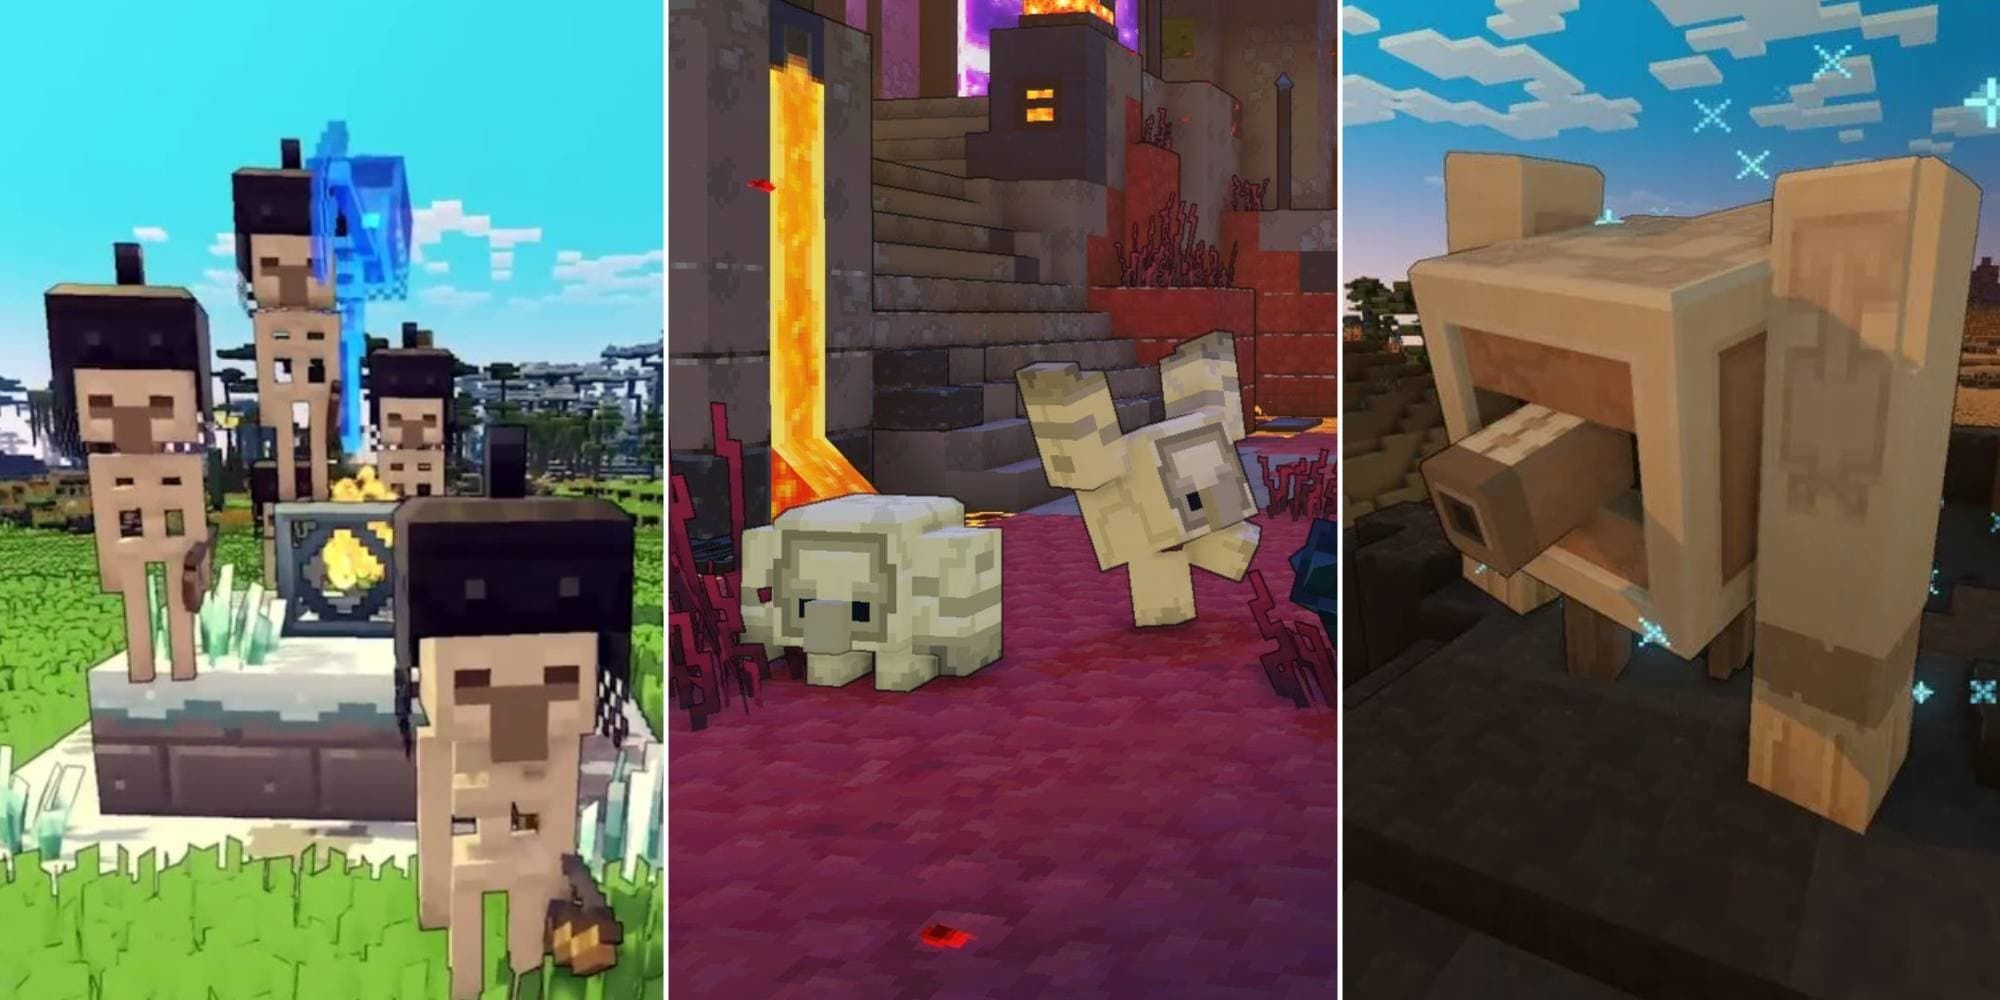 Skeletons are ready to be commander, Cobblestone Golems attack an outpost, and the First of Oak looks down from a hill in Minecraft Legends.